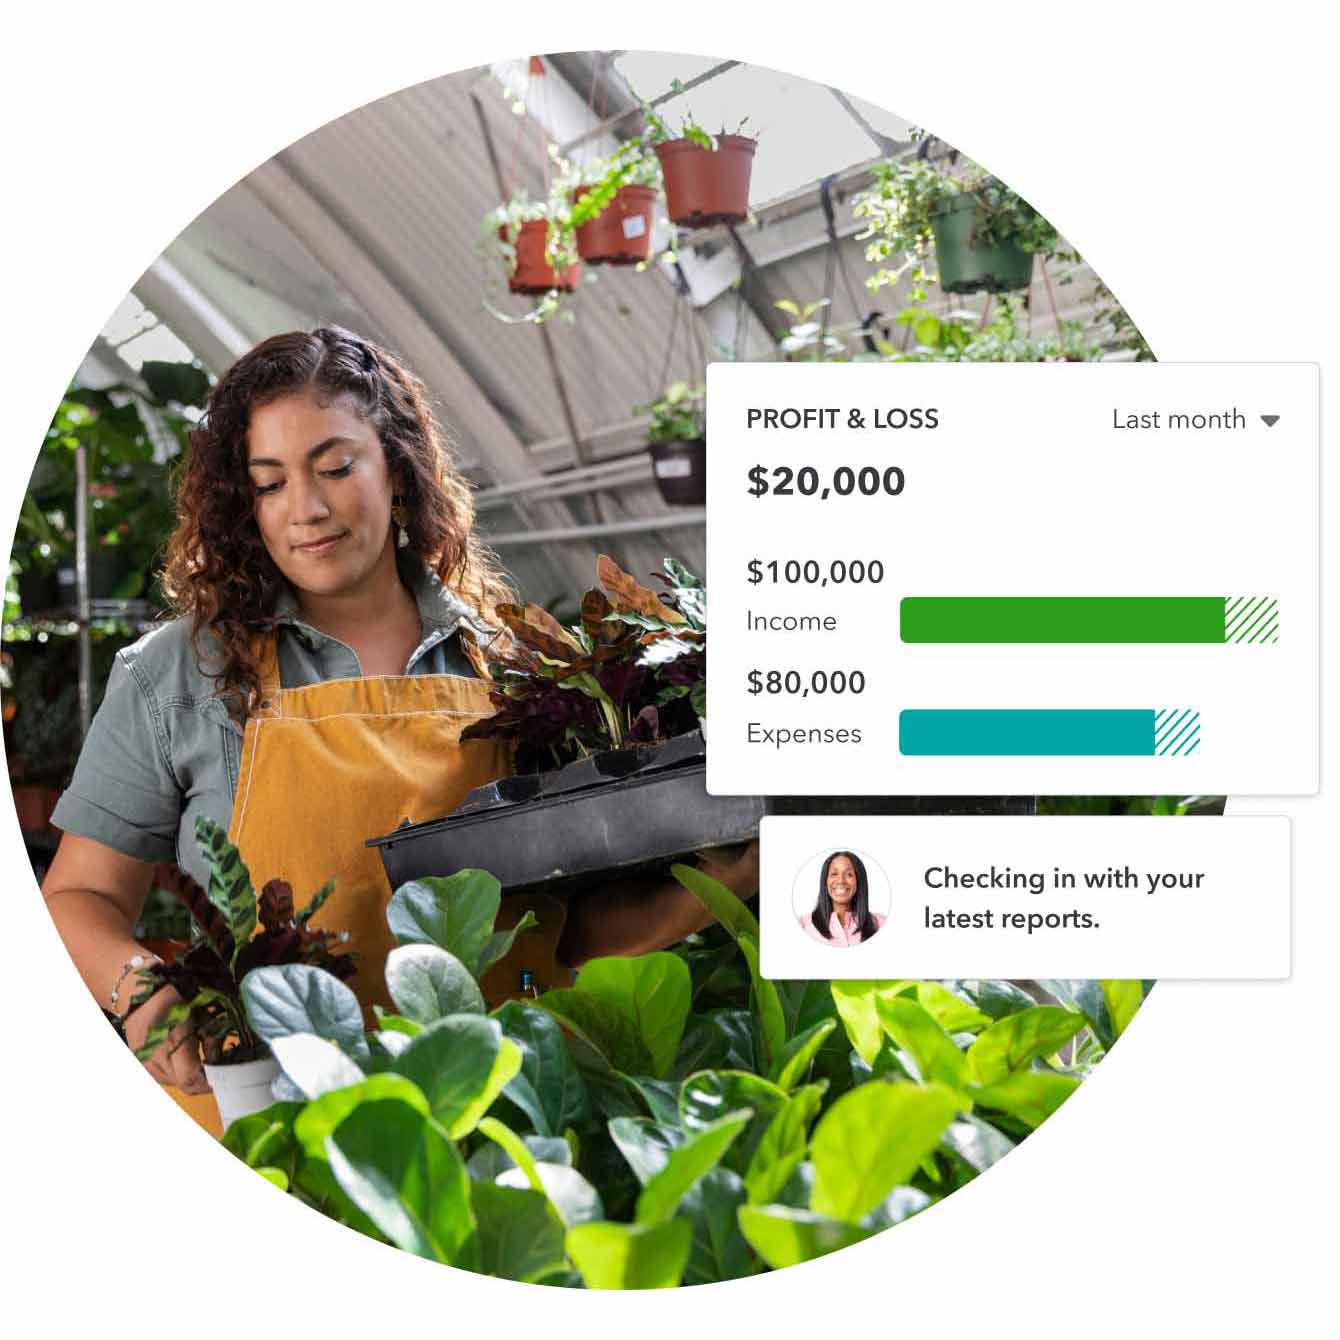 A small nursery business owner distributing potted plants in a nursery, and a profit and loss widget with a chat window with a bookkeeper is overlapping photo.